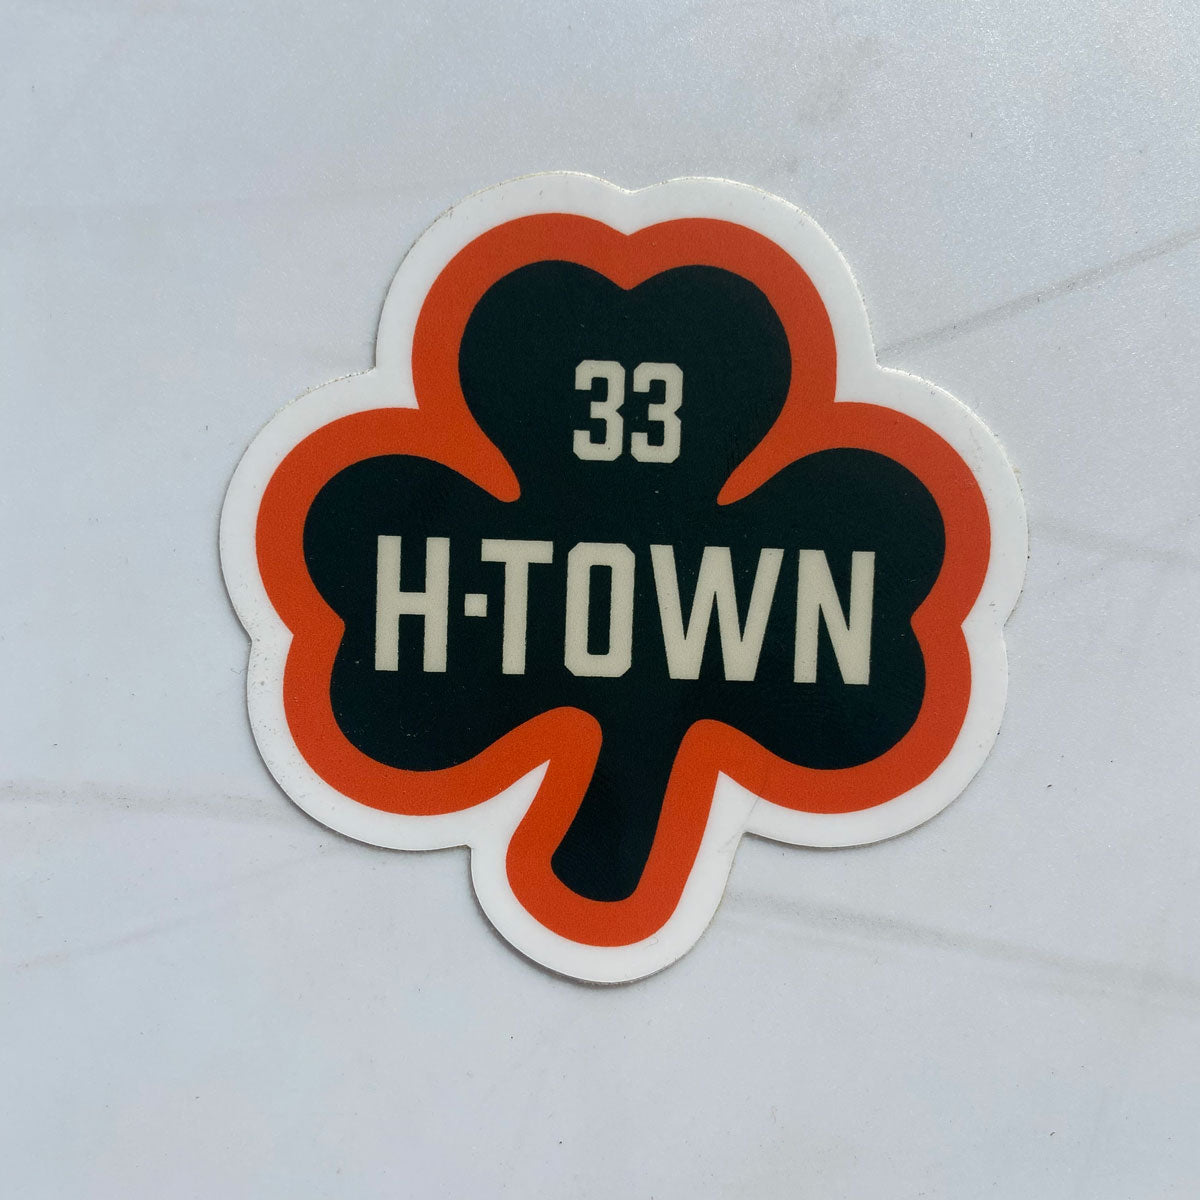 Htown Stickers for Sale